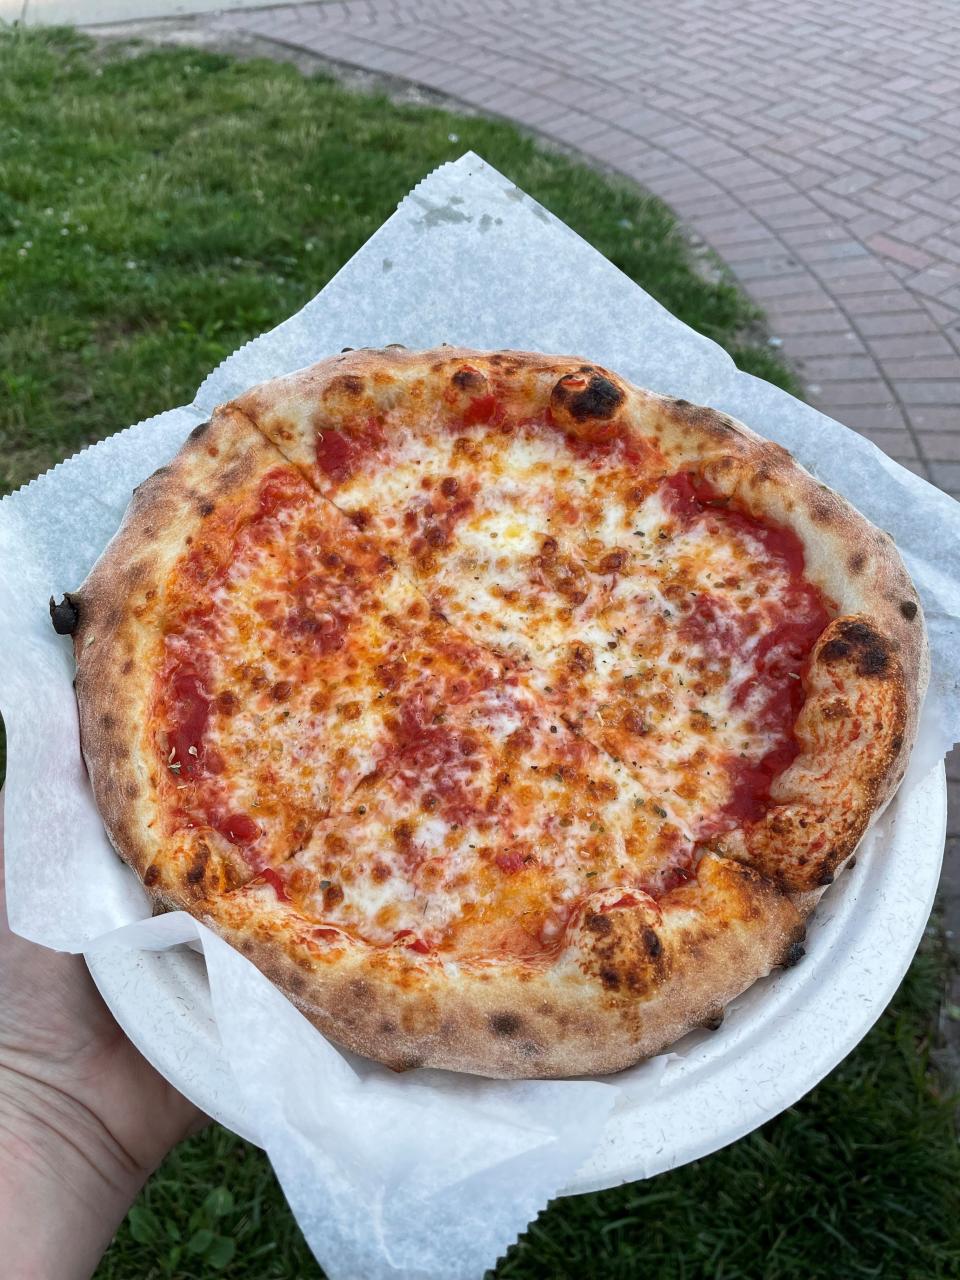 A wood-fired pizza from Woodshed Pizza, a Brick-based mobile pizza business.